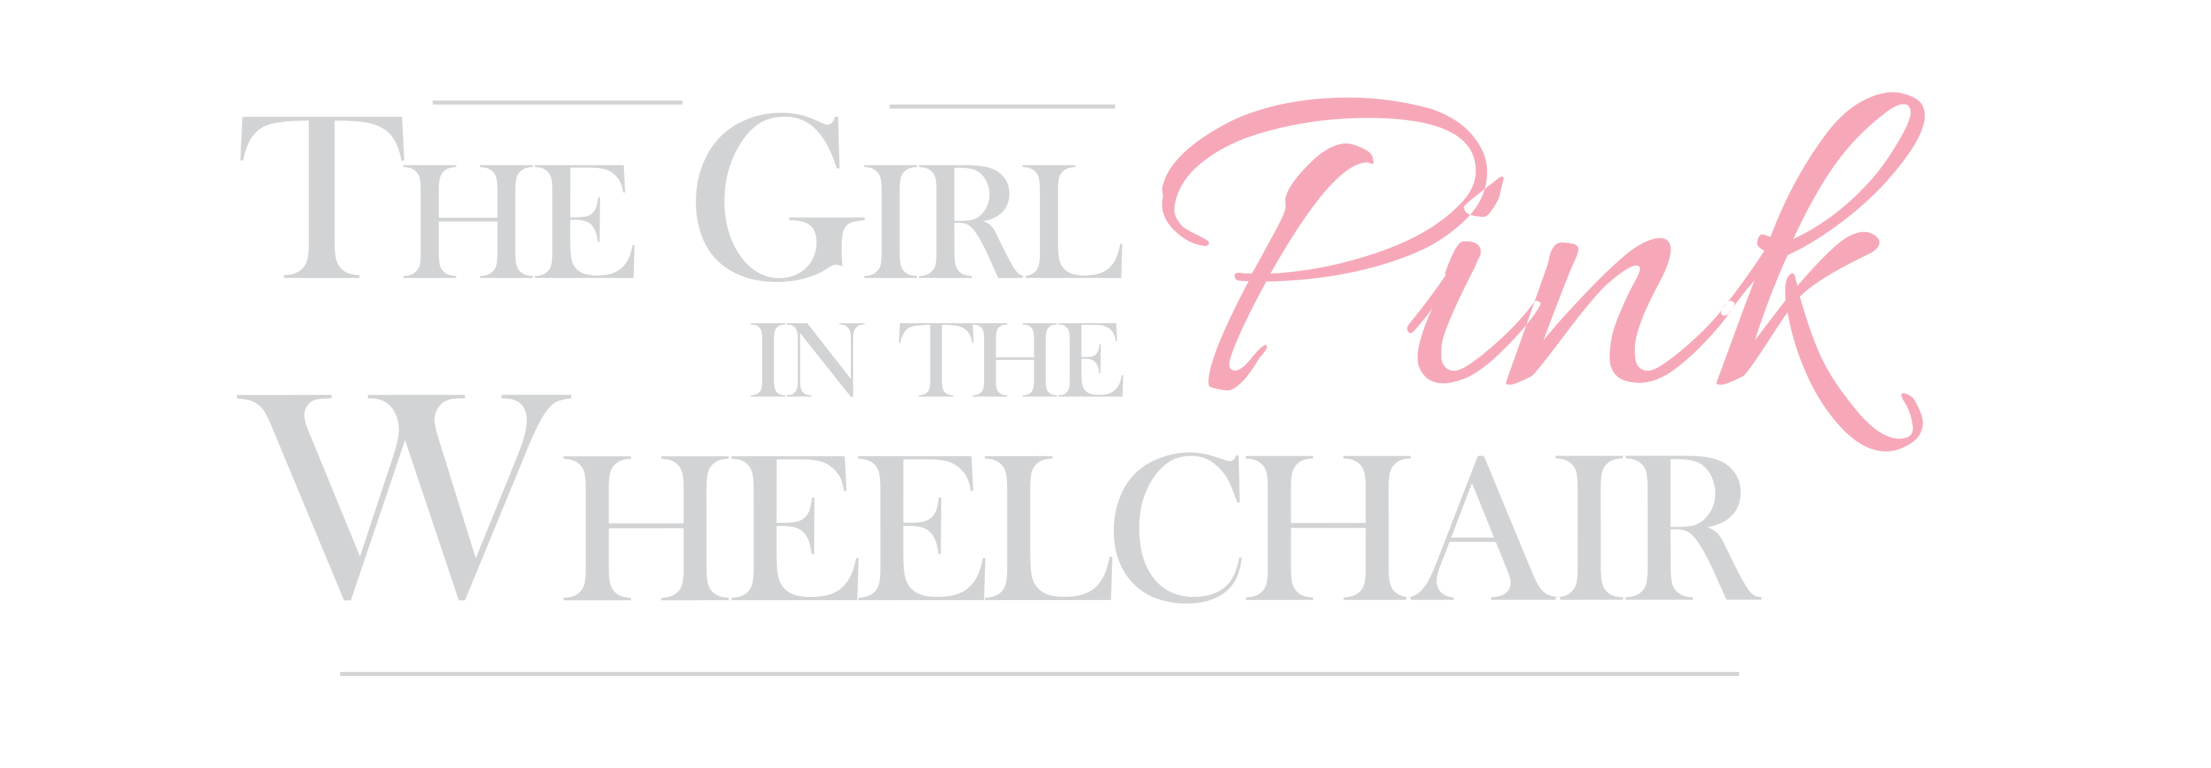 The Girl in The Pink Wheelchair  